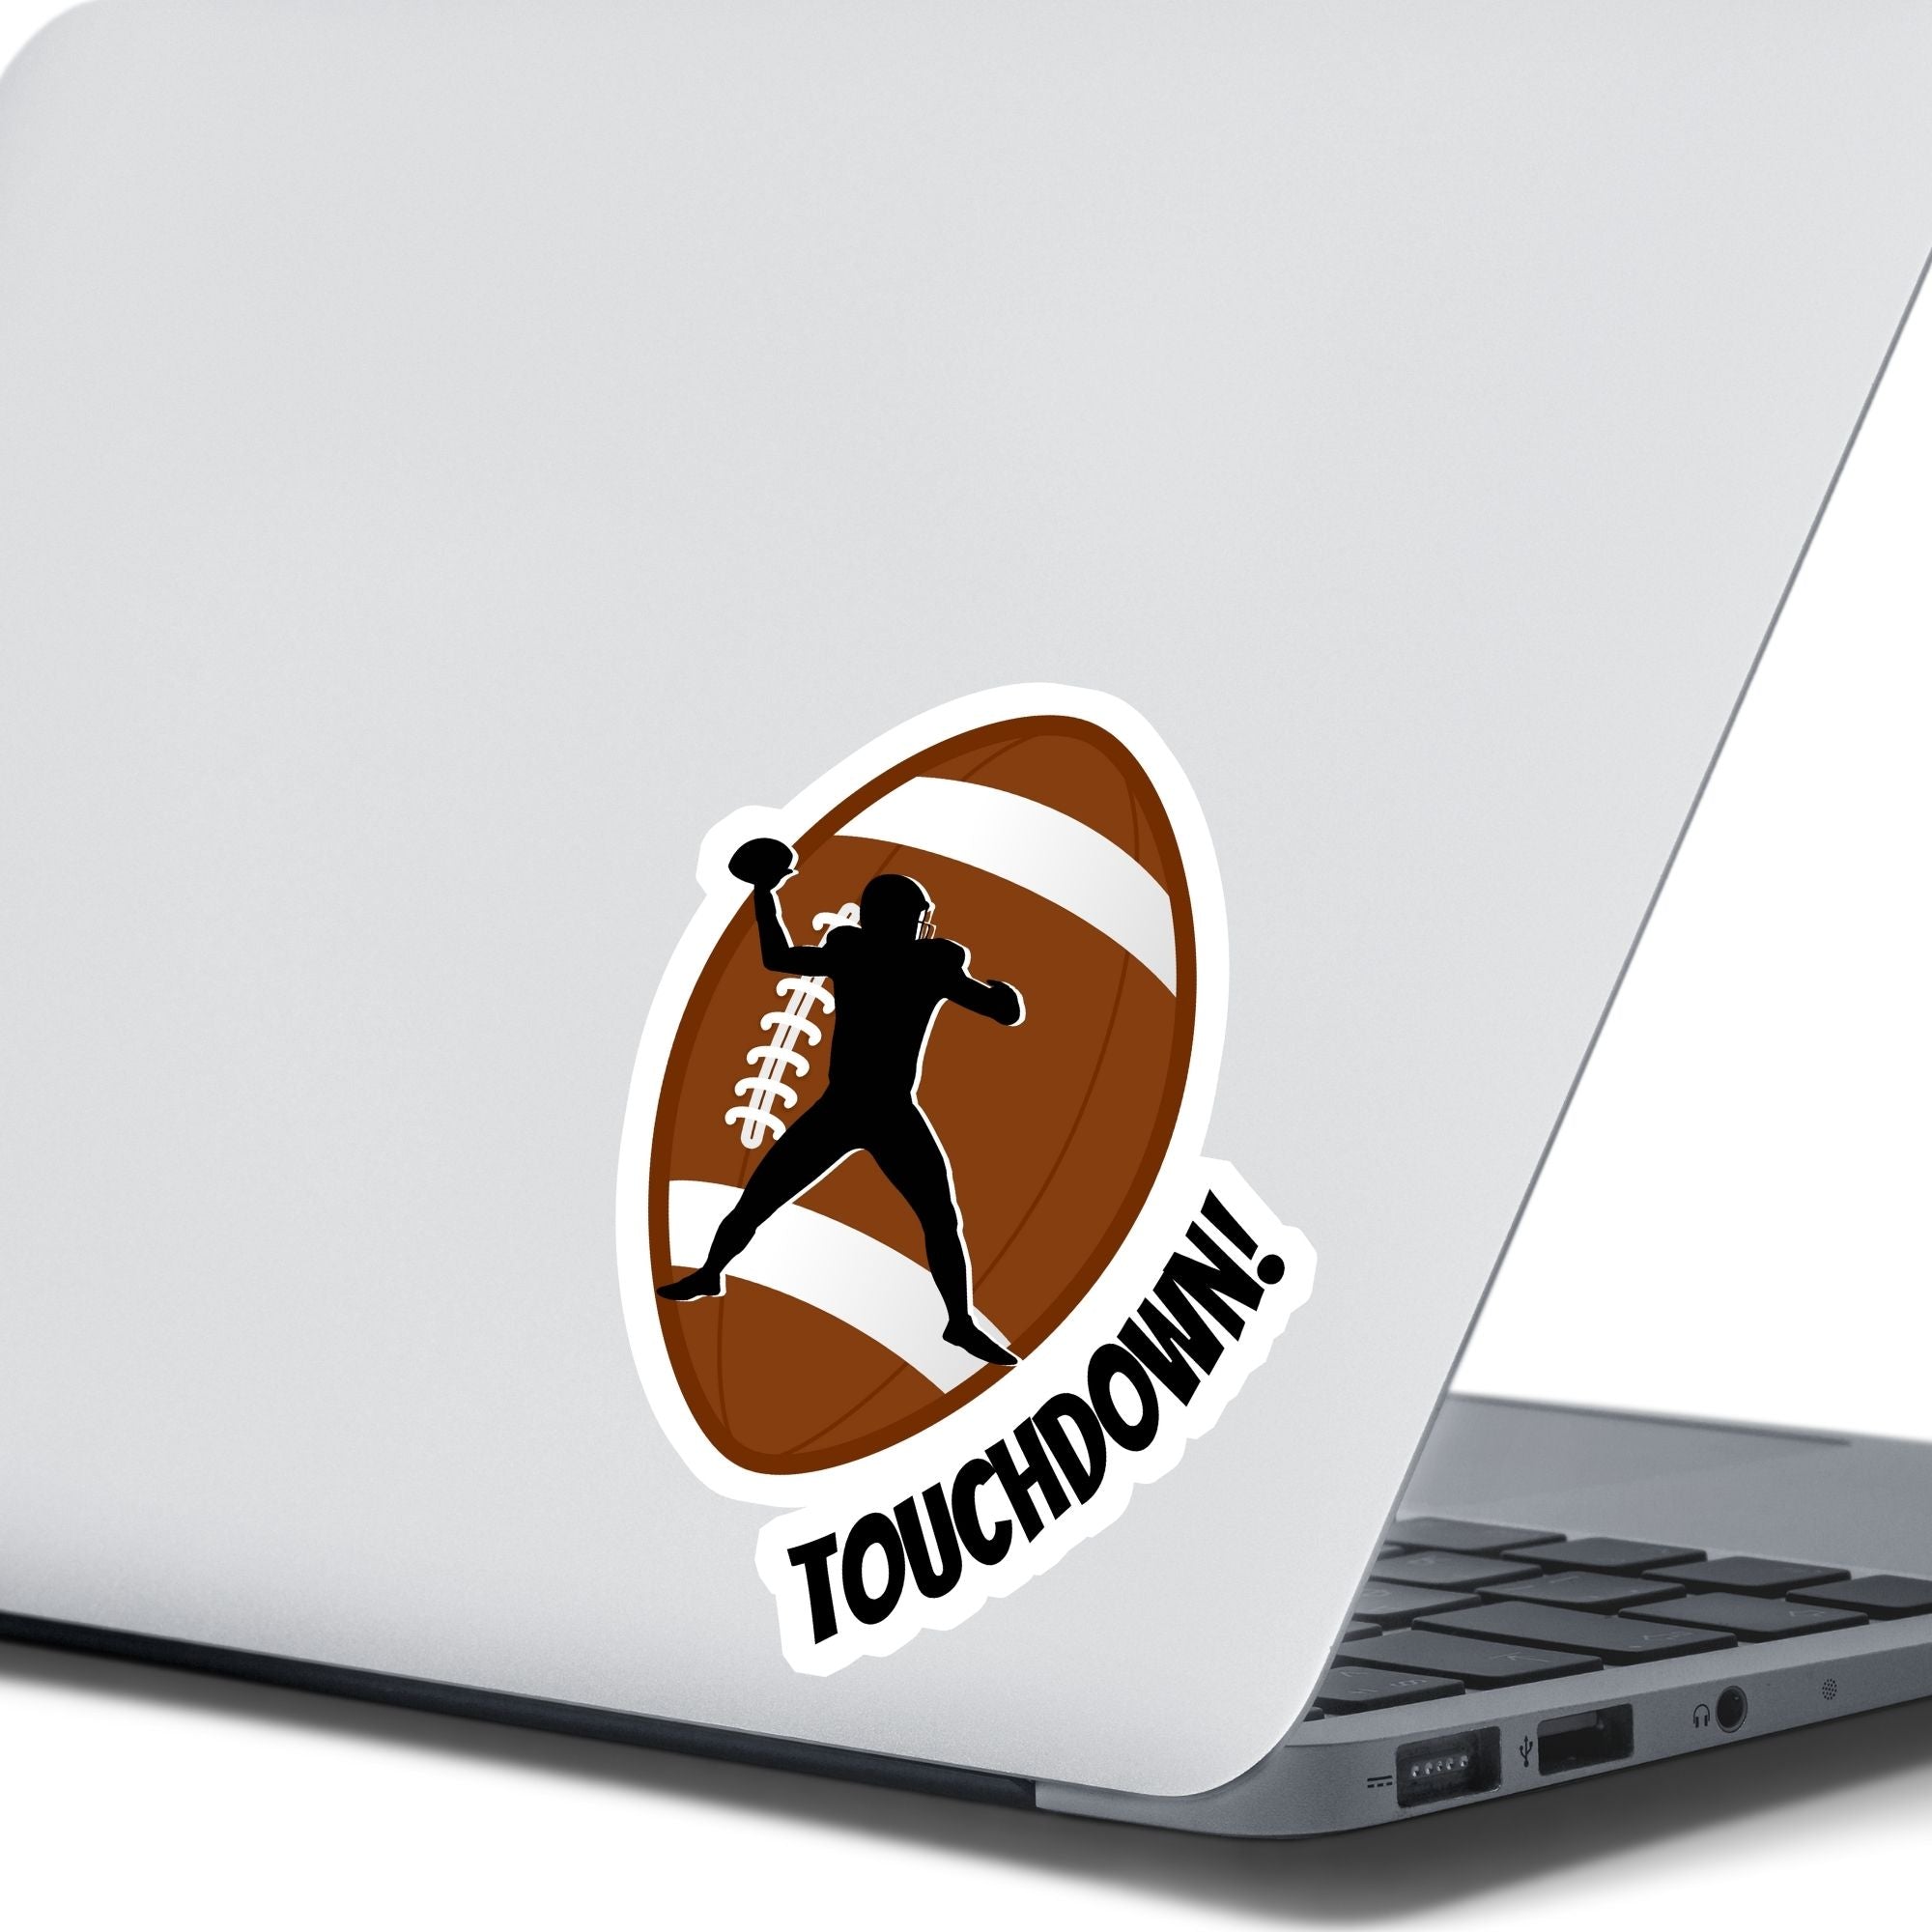 This individual die-cut sticker features the silhouette of a football (American) player about to pass the ball, on a football background, with the word "Touchdown!" on the lower right side. This image shows the touchdown sticker on the back of an open laptop.